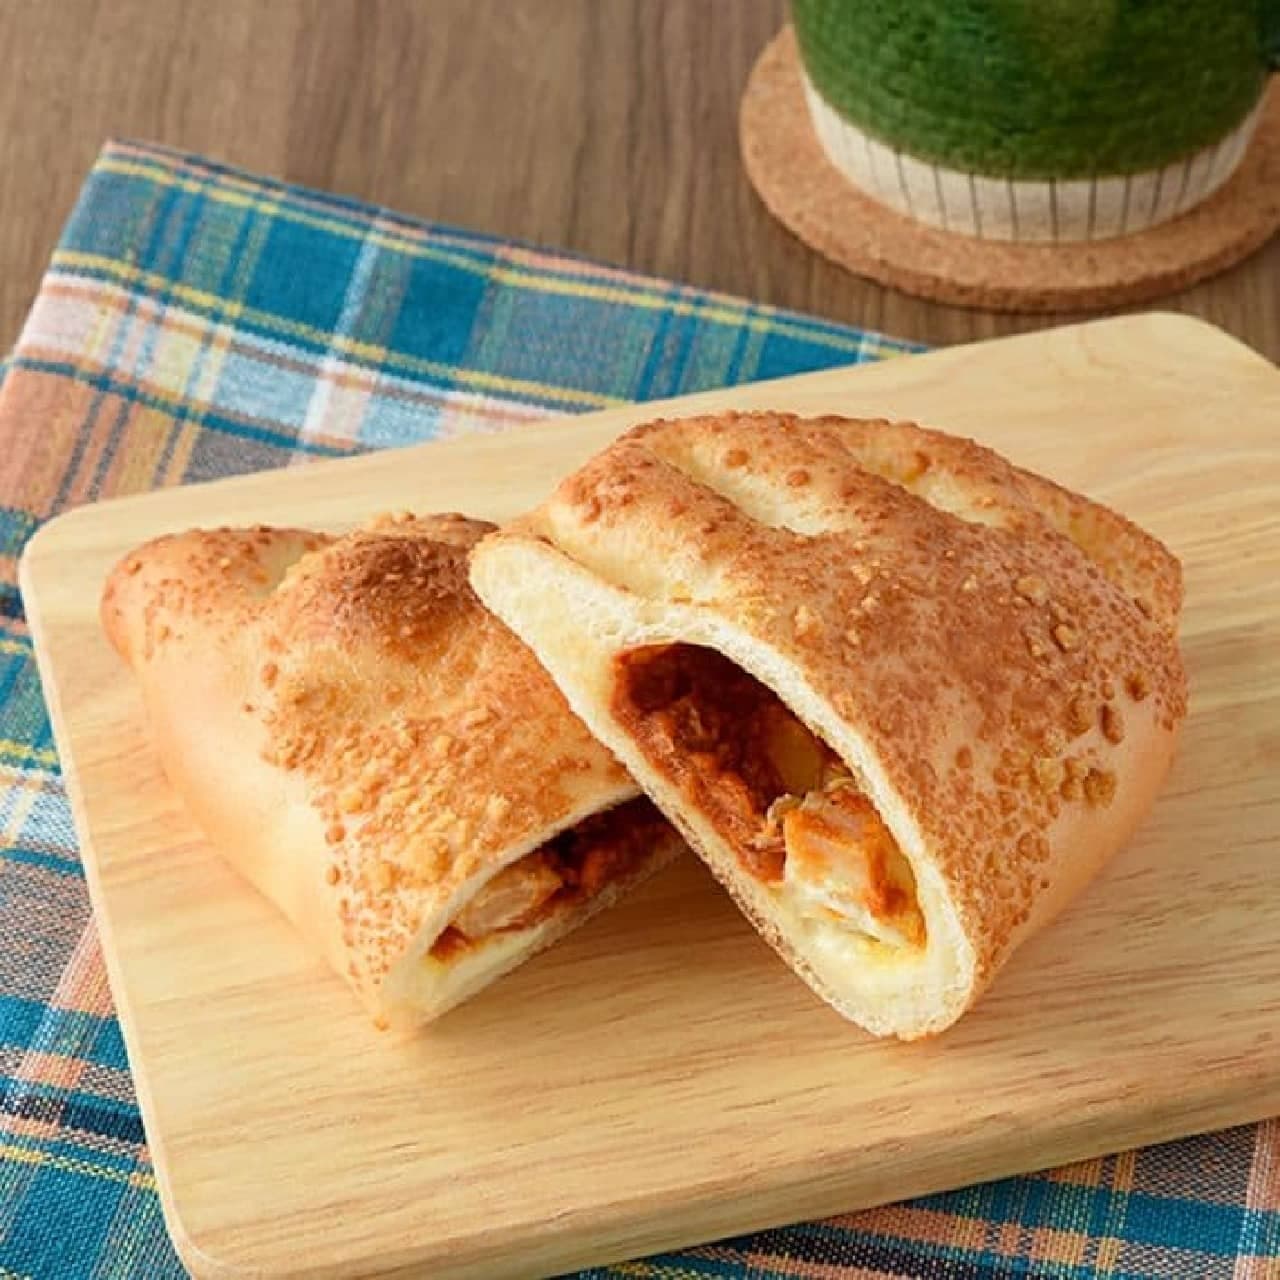 FamilyMart "Wrapped Baked Pizza (Chicken & Tomato)